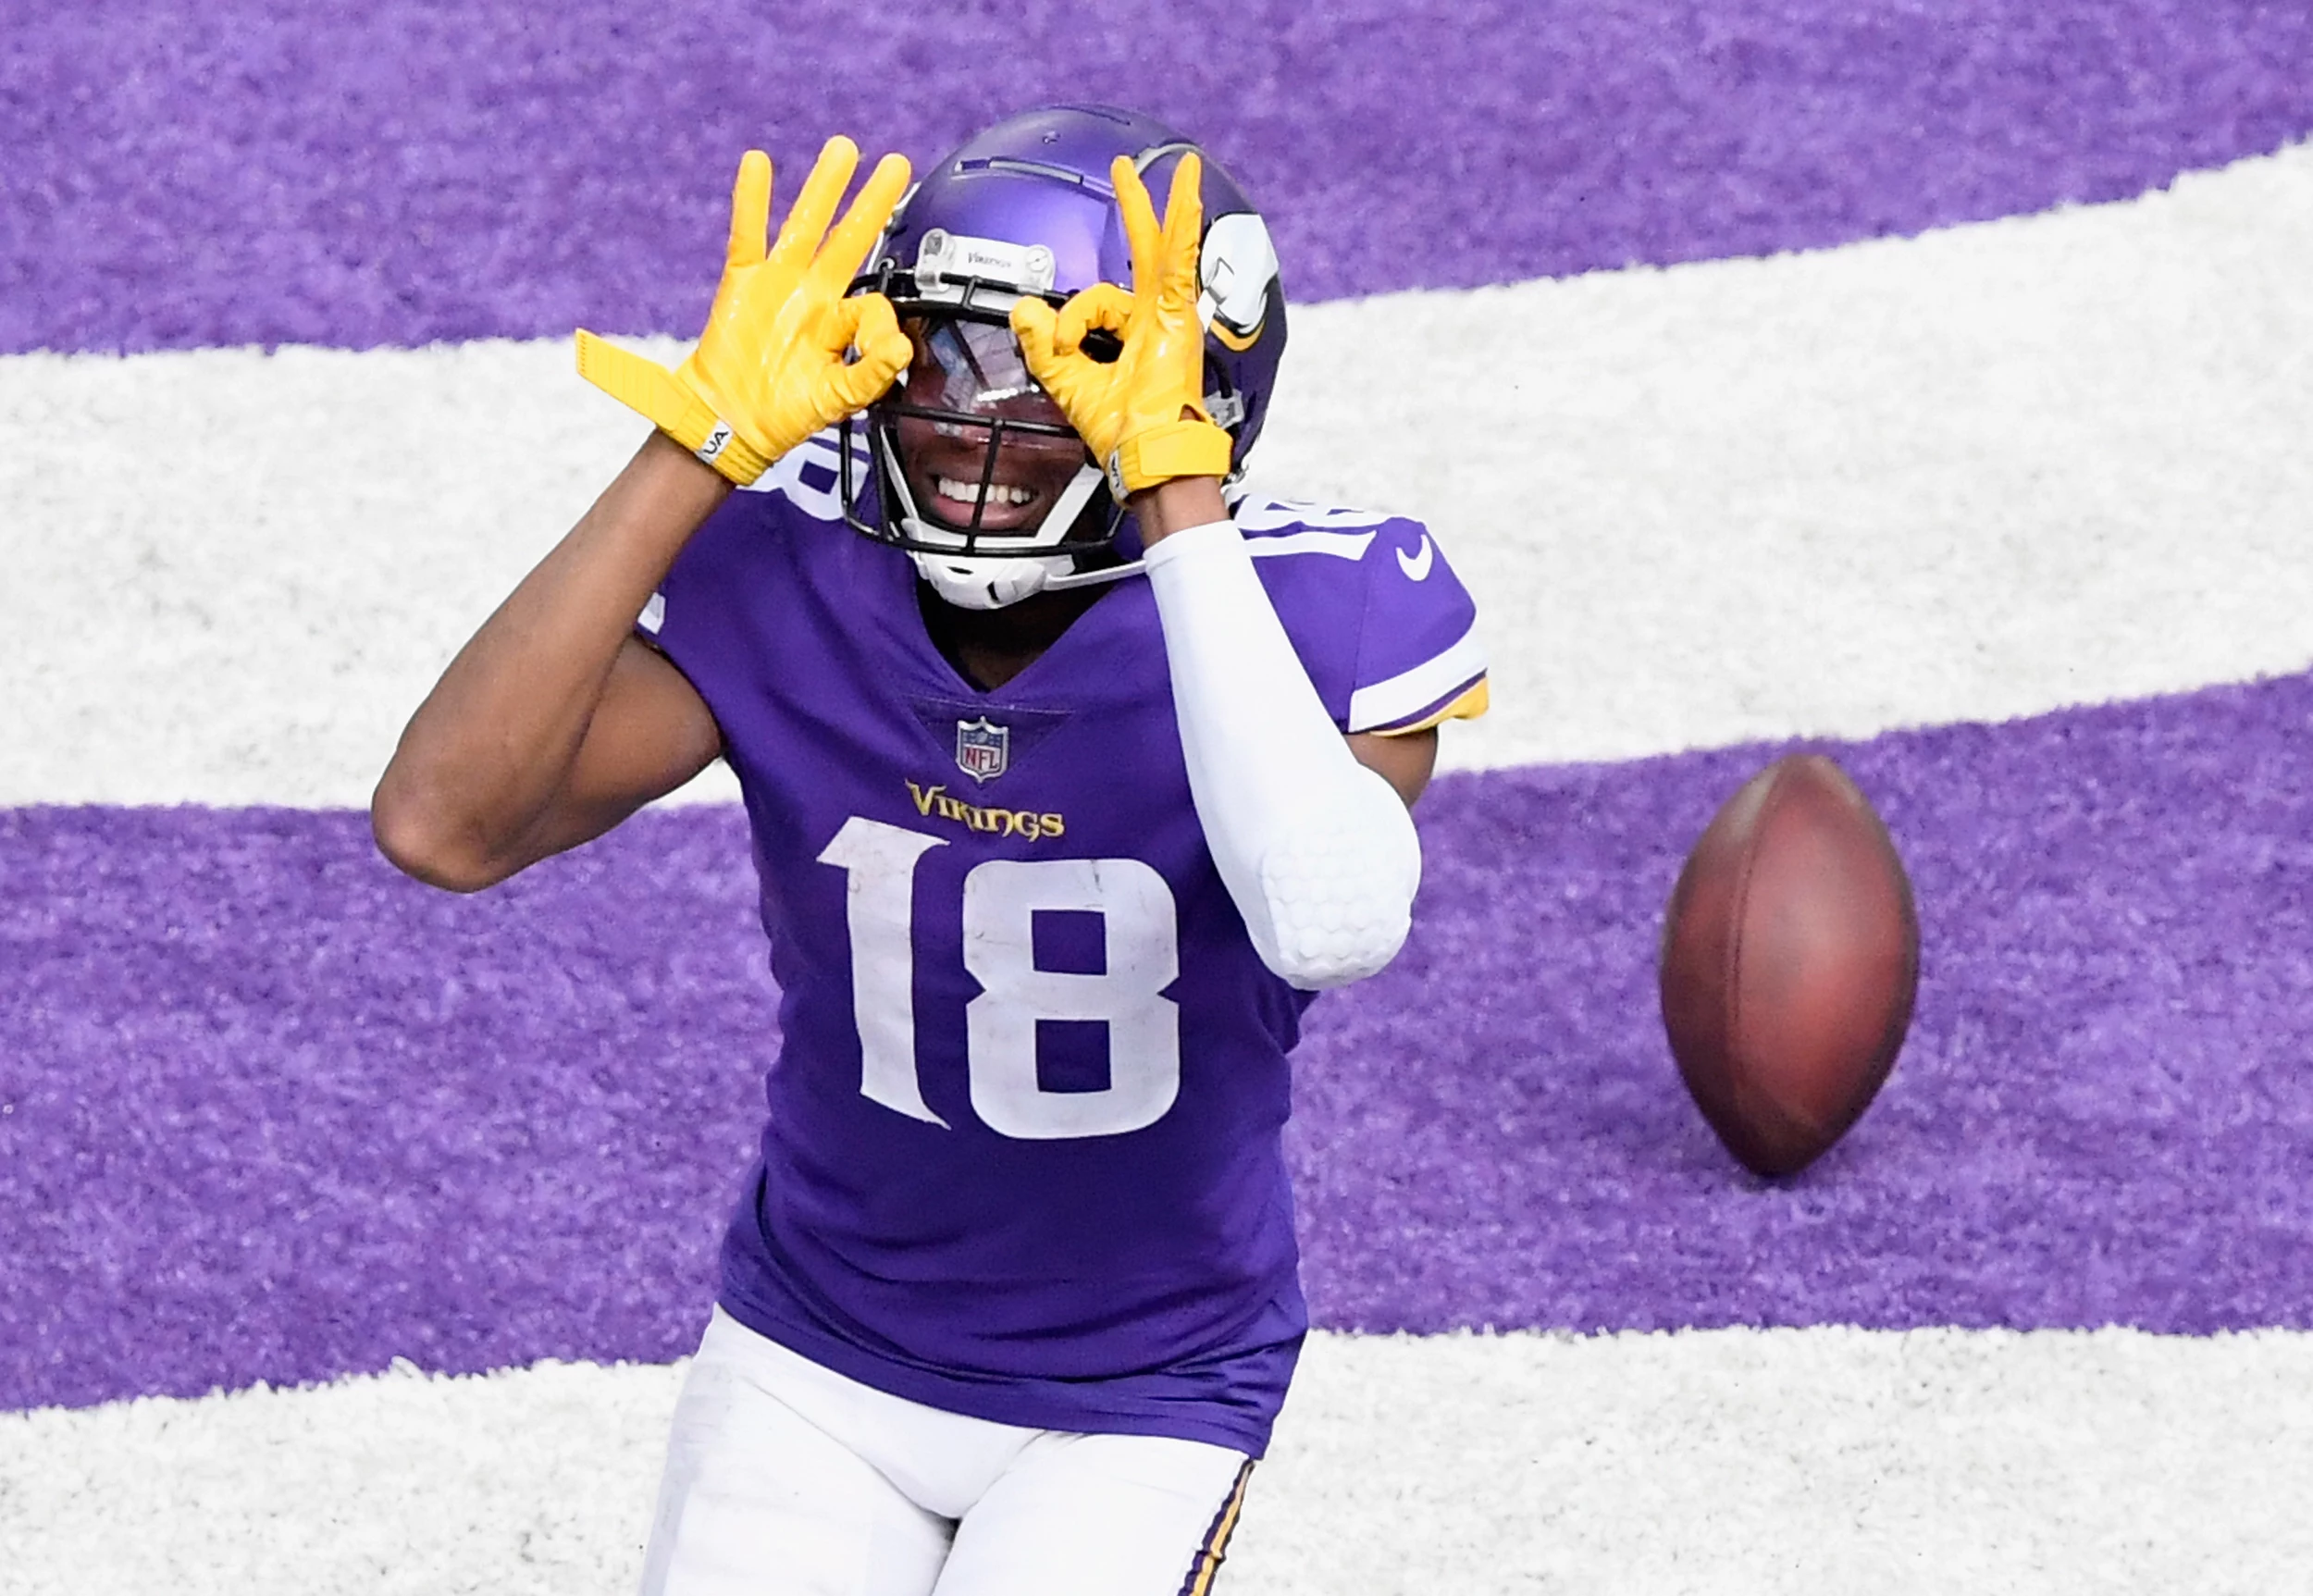 Vikings WR Justin Jefferson named Offensive Player of the Year at NFL Awards